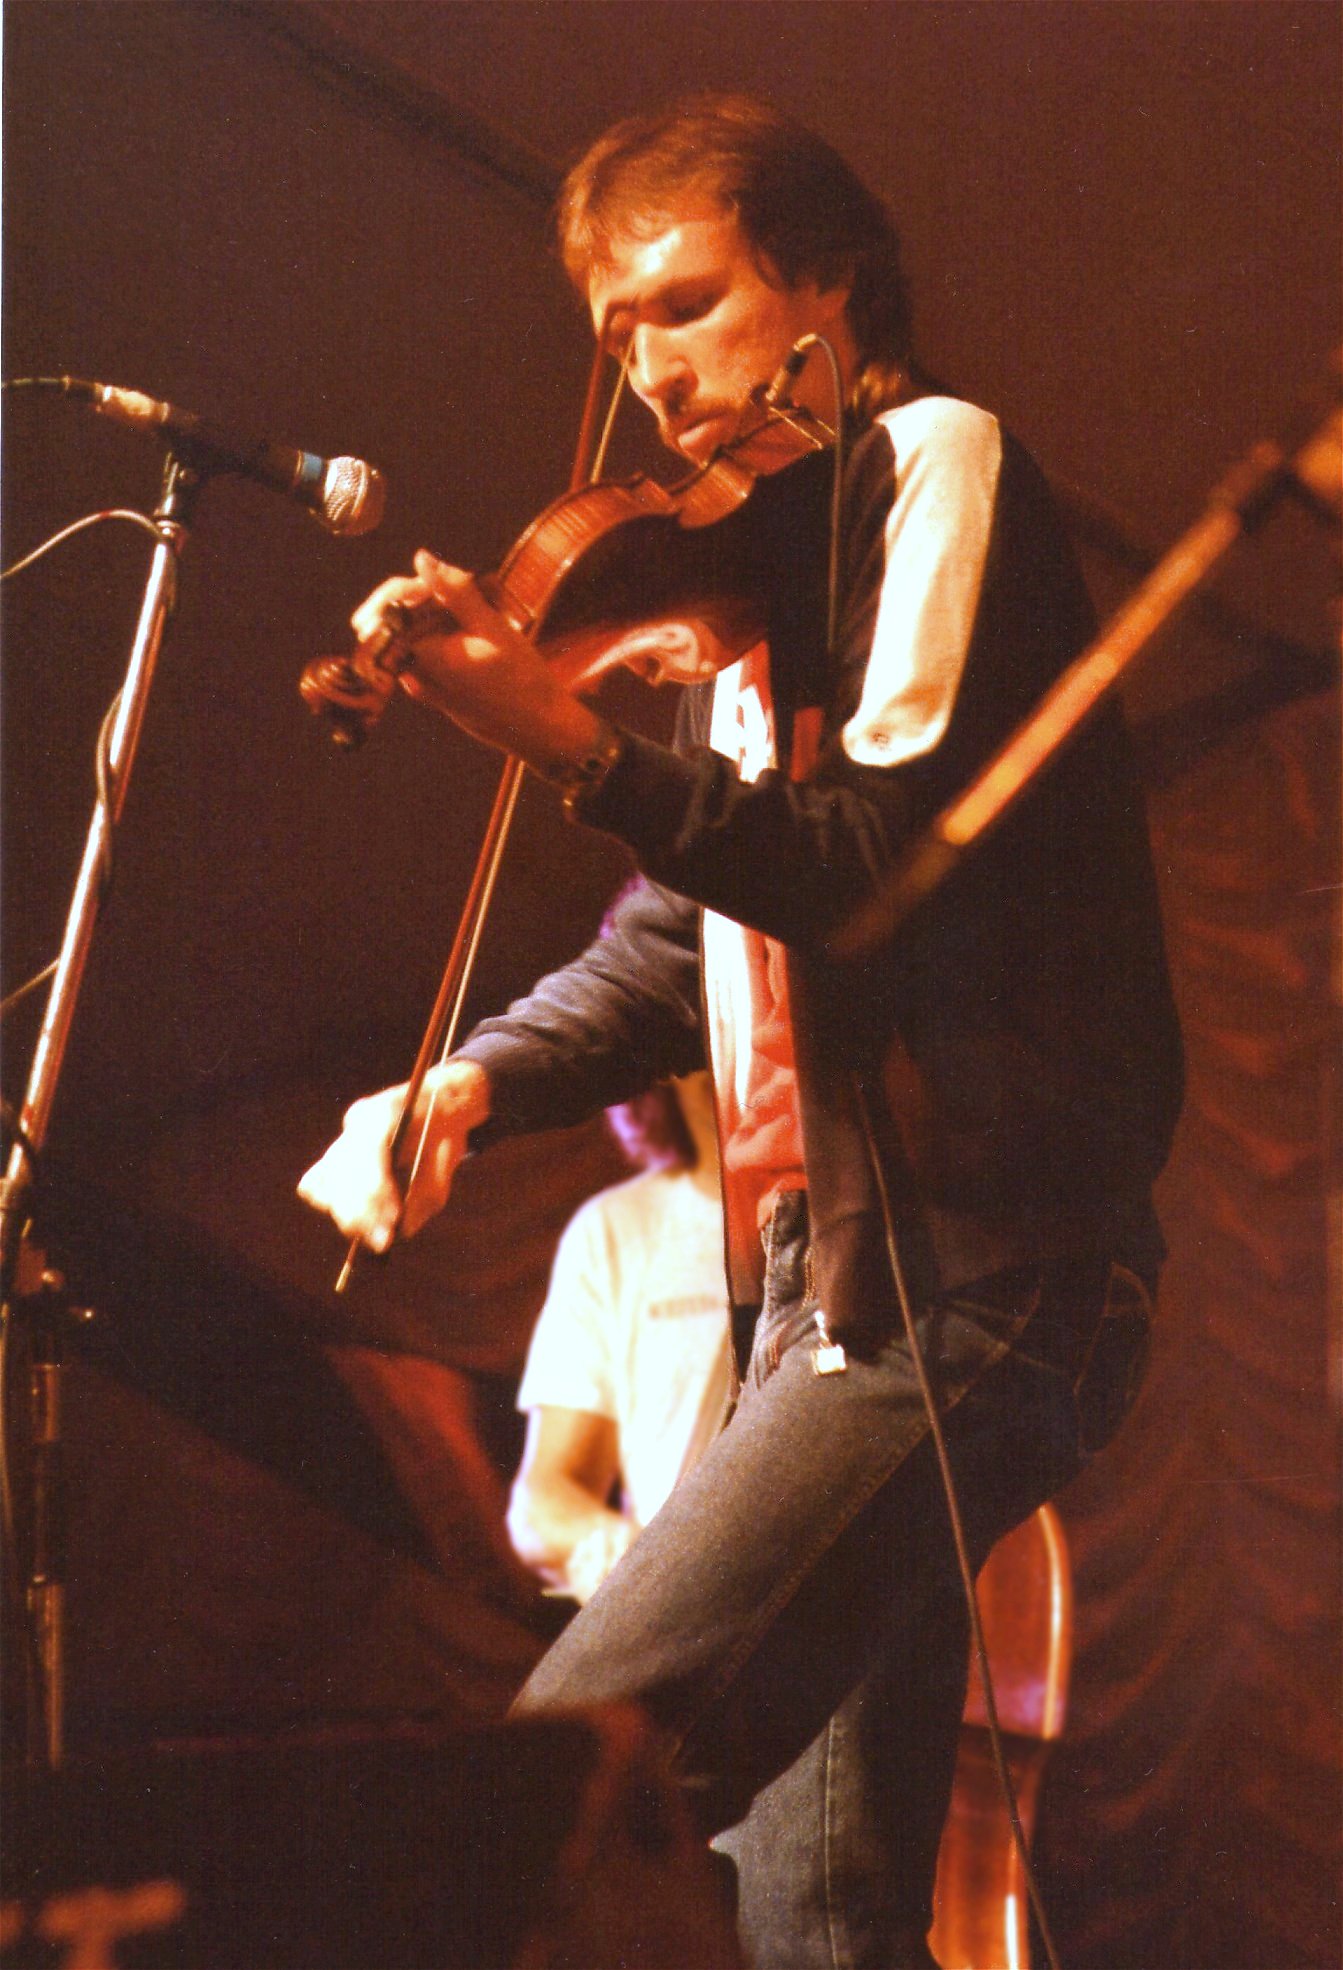 O'Connor on stage at the 1985 [[Cambridge Folk Festival]]